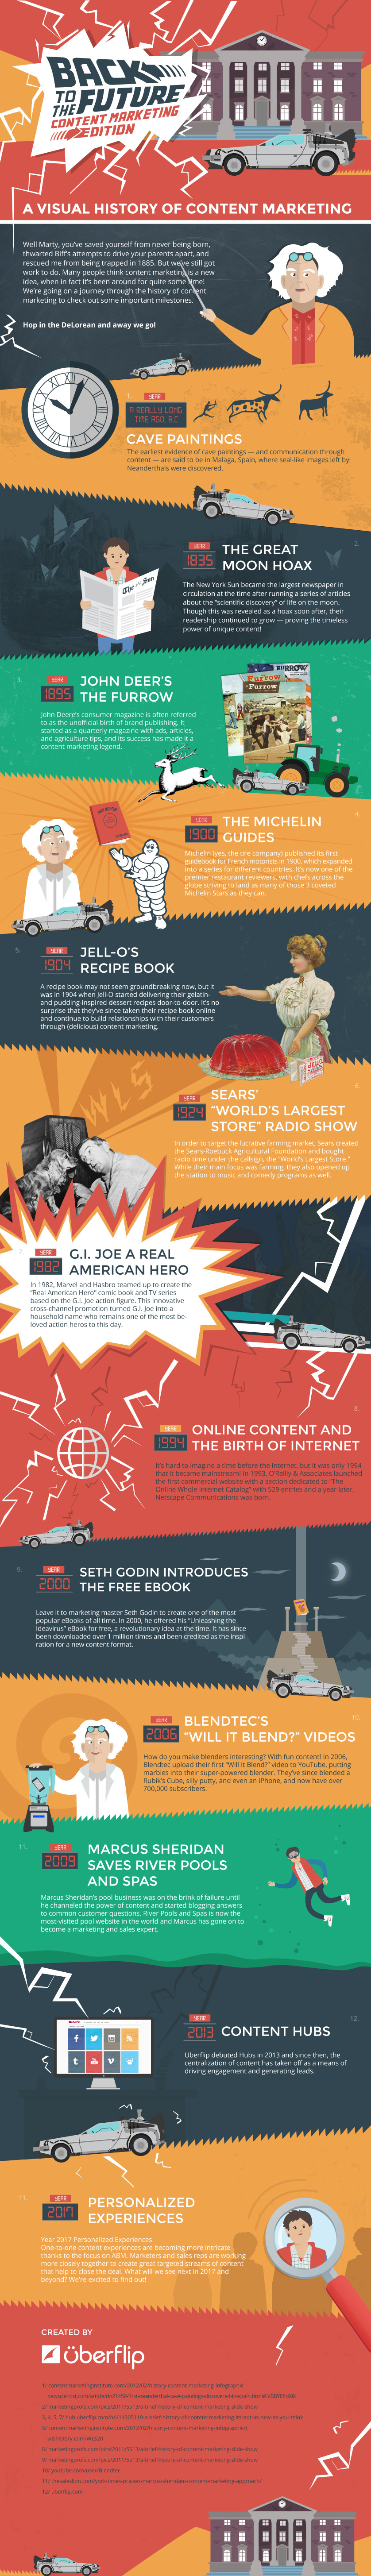 History of Content Marketing Infographic